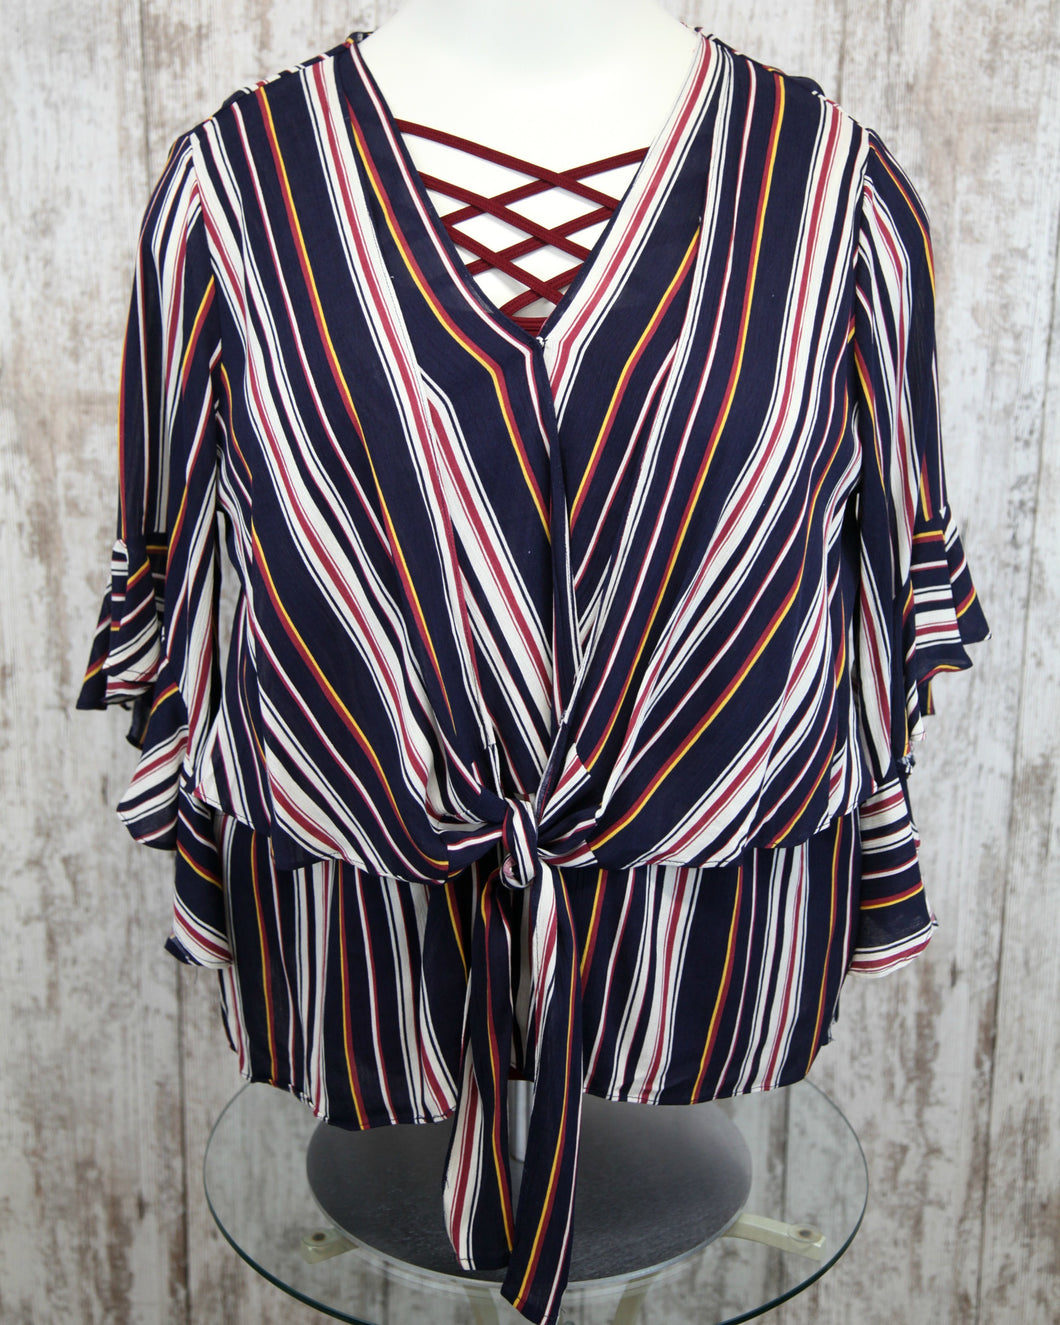 PLUS Striped Ruffle Bell Slv V Neck Layered Front Top w Center Tie WL5376